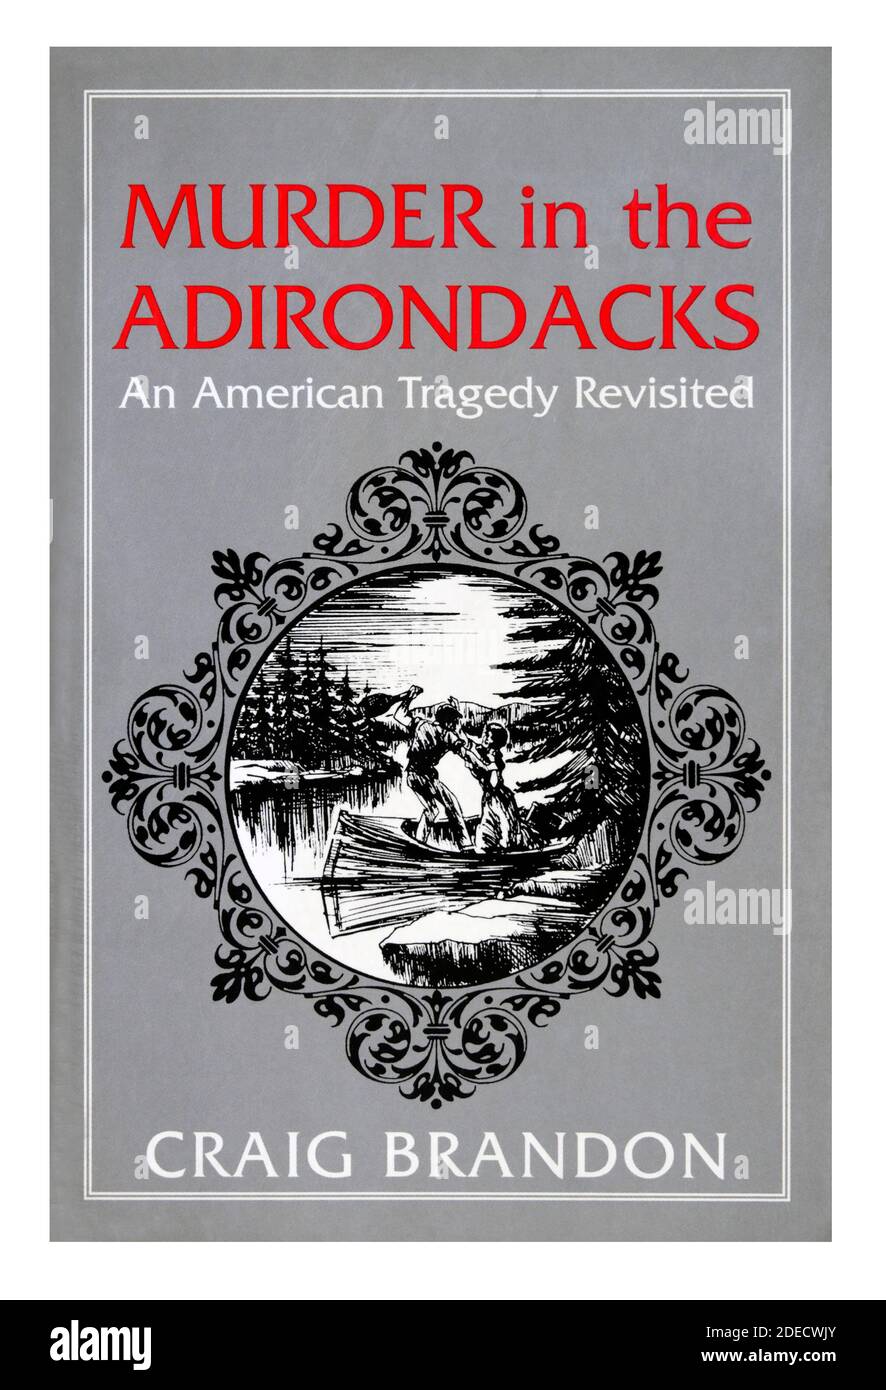 Book cover "Murder in the Adirondacks An American Tragedy Revisited" by Craig Brandon. Stock Photo